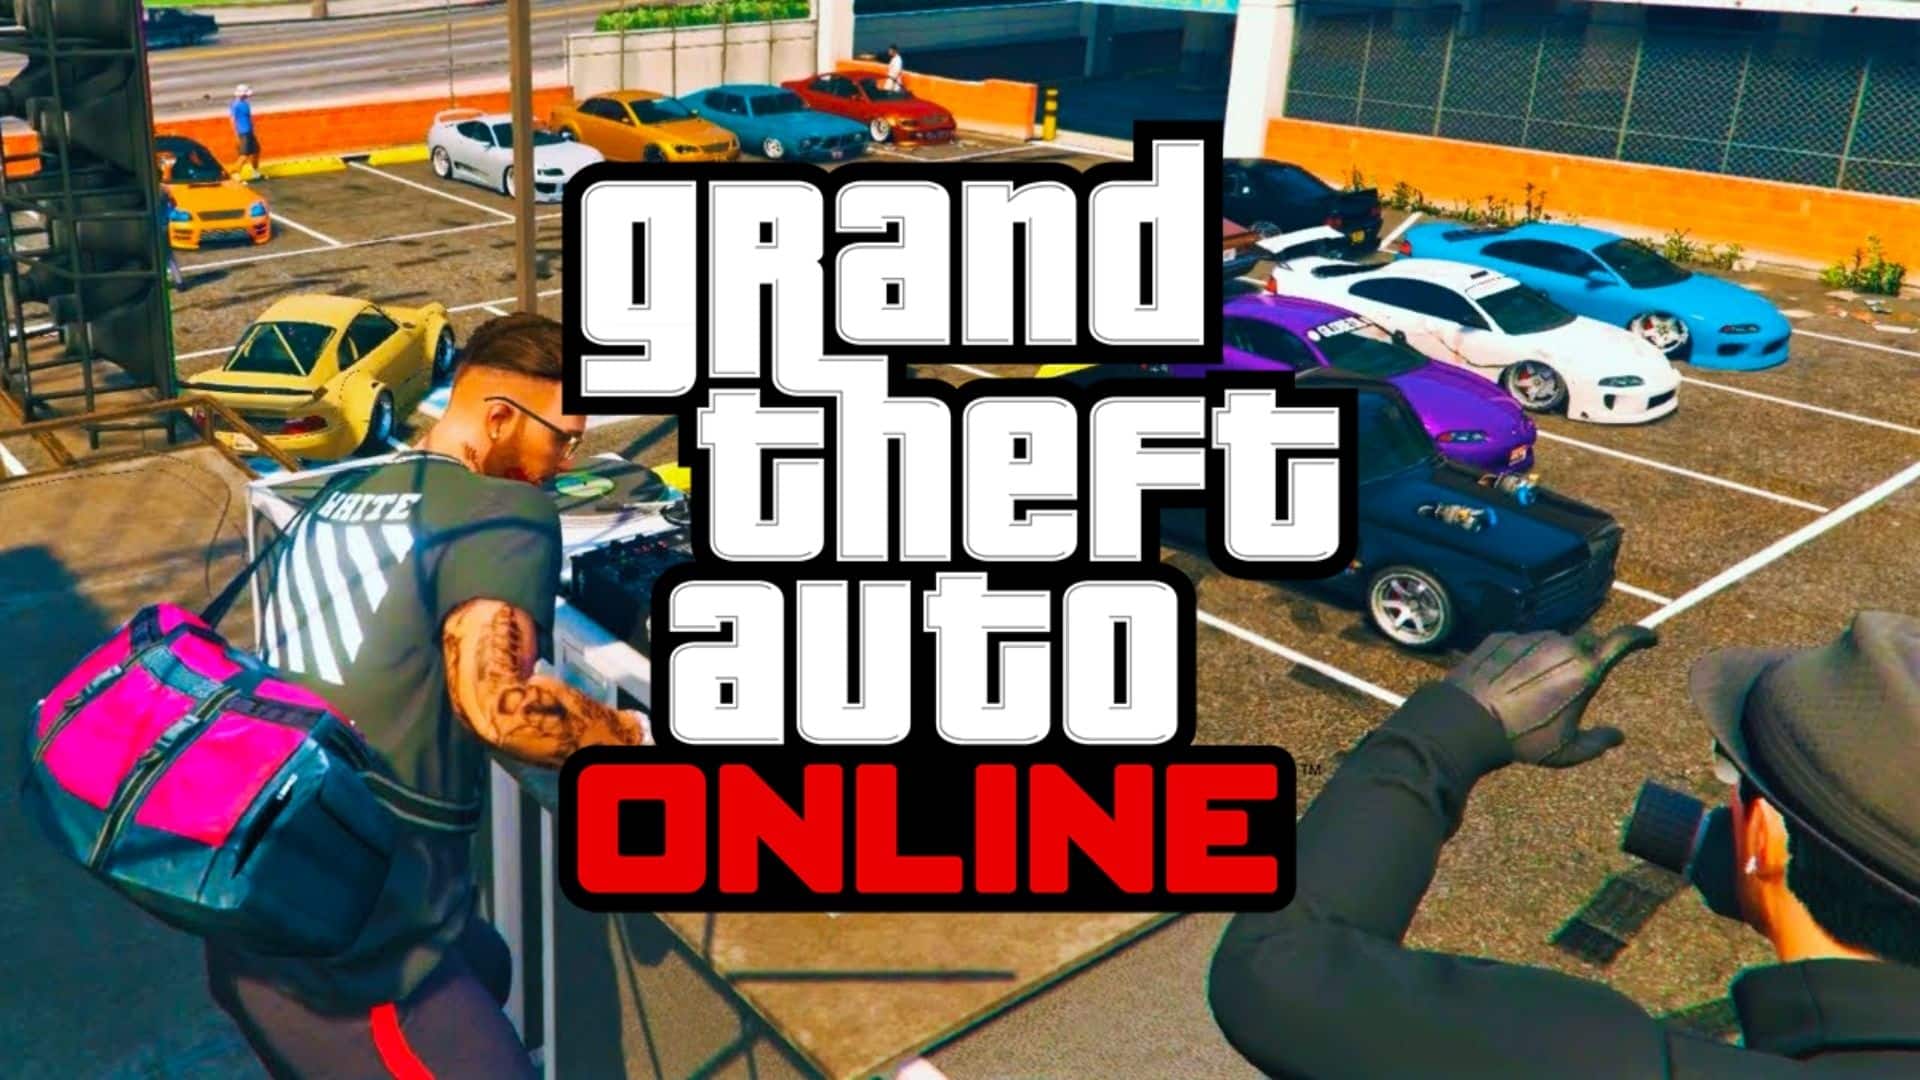 GTA Online players with cars at DJ party and GTA Online logo